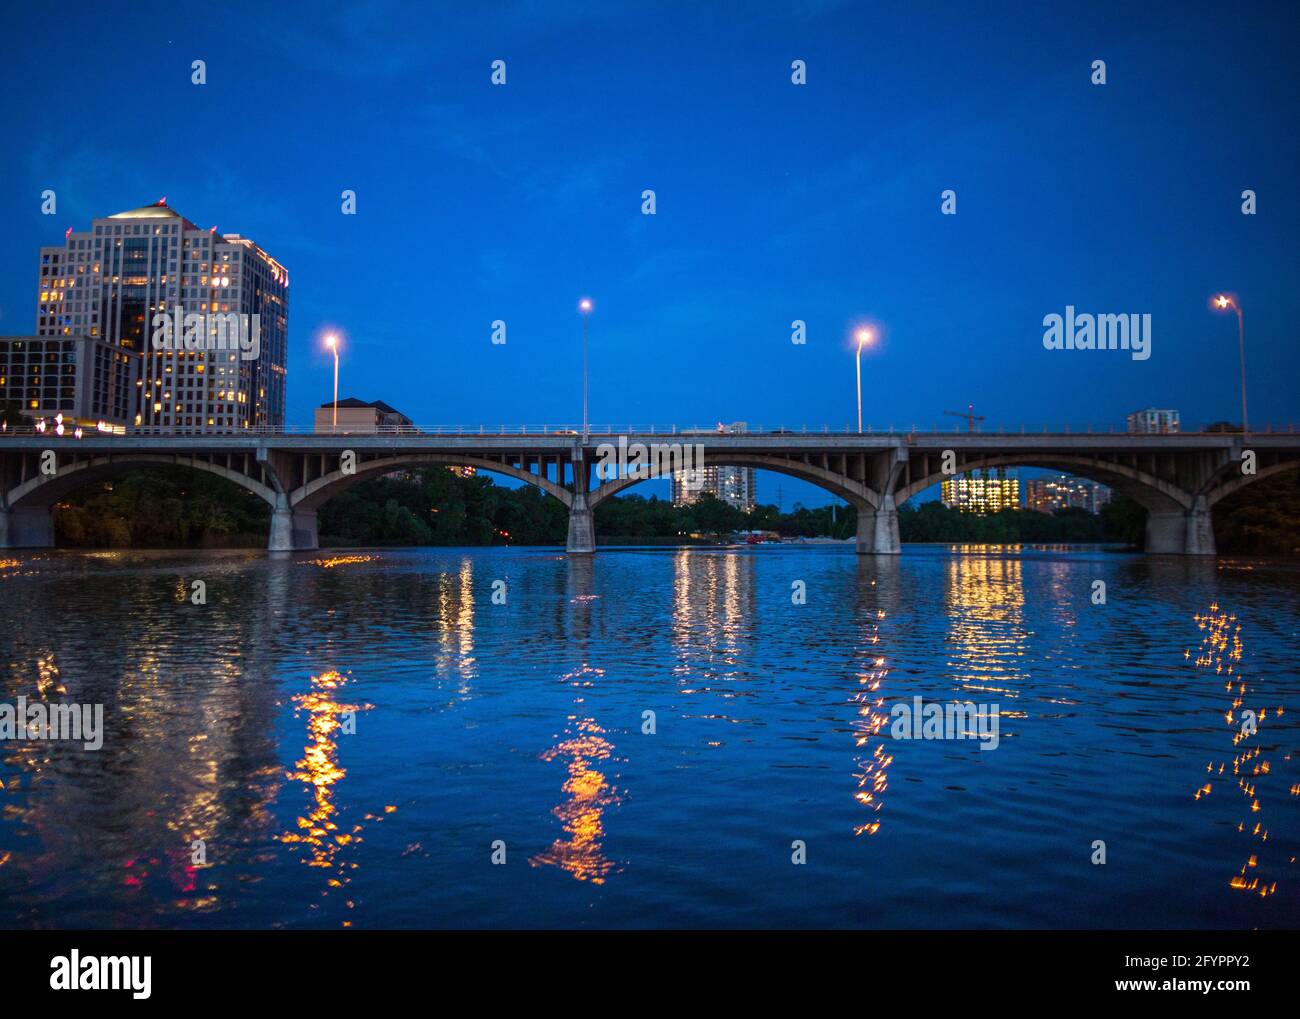 Austin city skyline at night with the South Congress Bridge from the Colorado River. Austin, Texas, USA Stock Photo